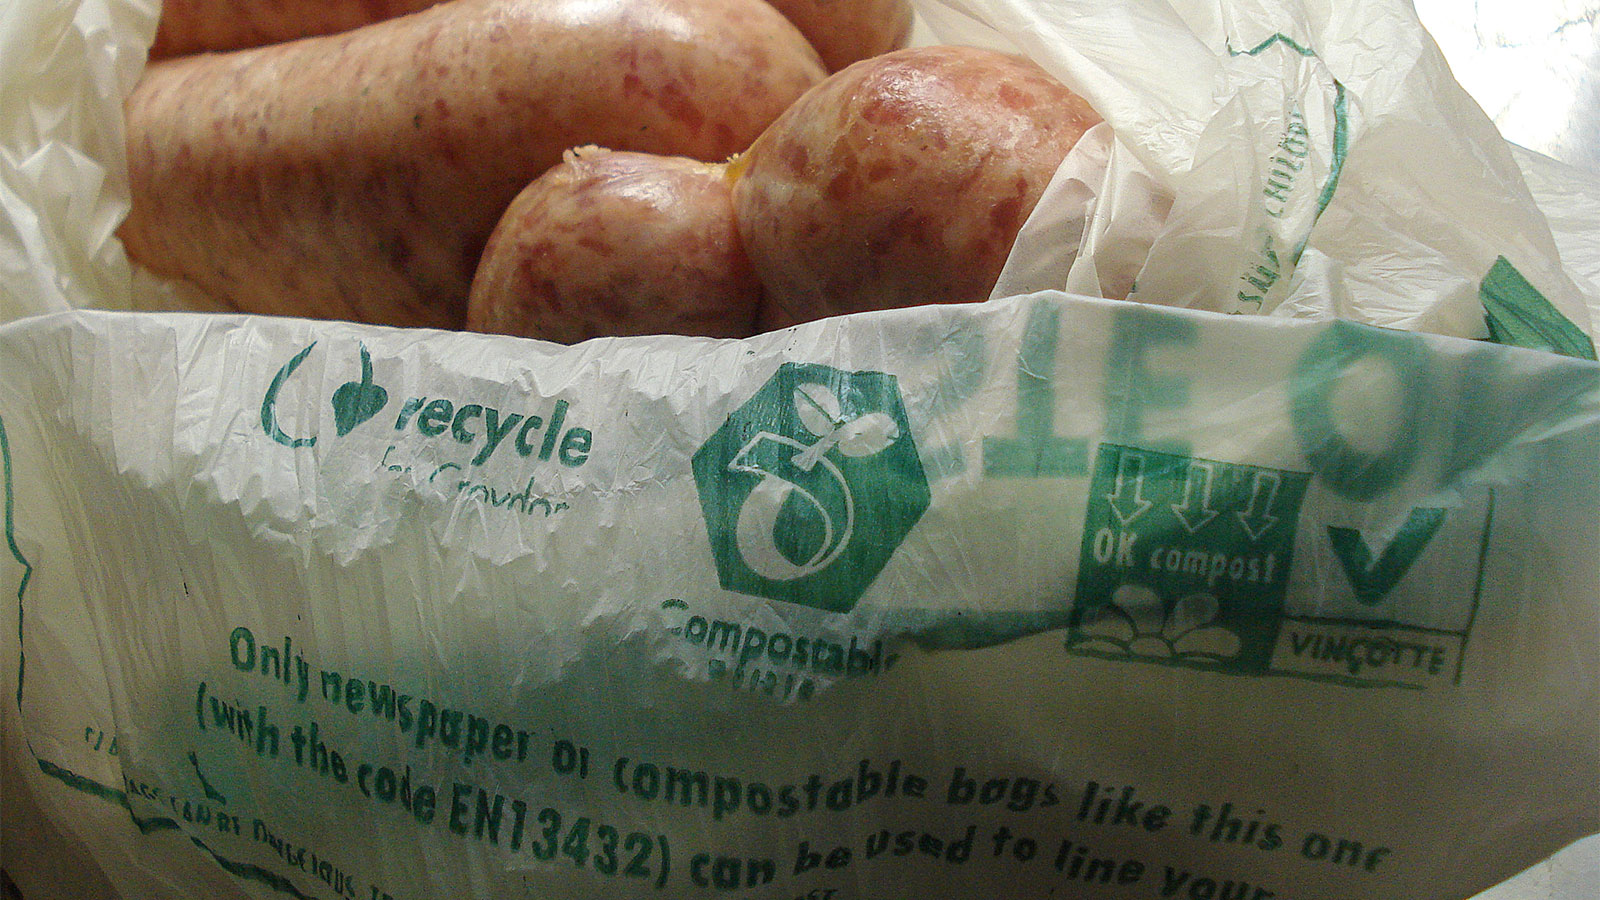 Compostable plastic bag filled with delicious sausages.